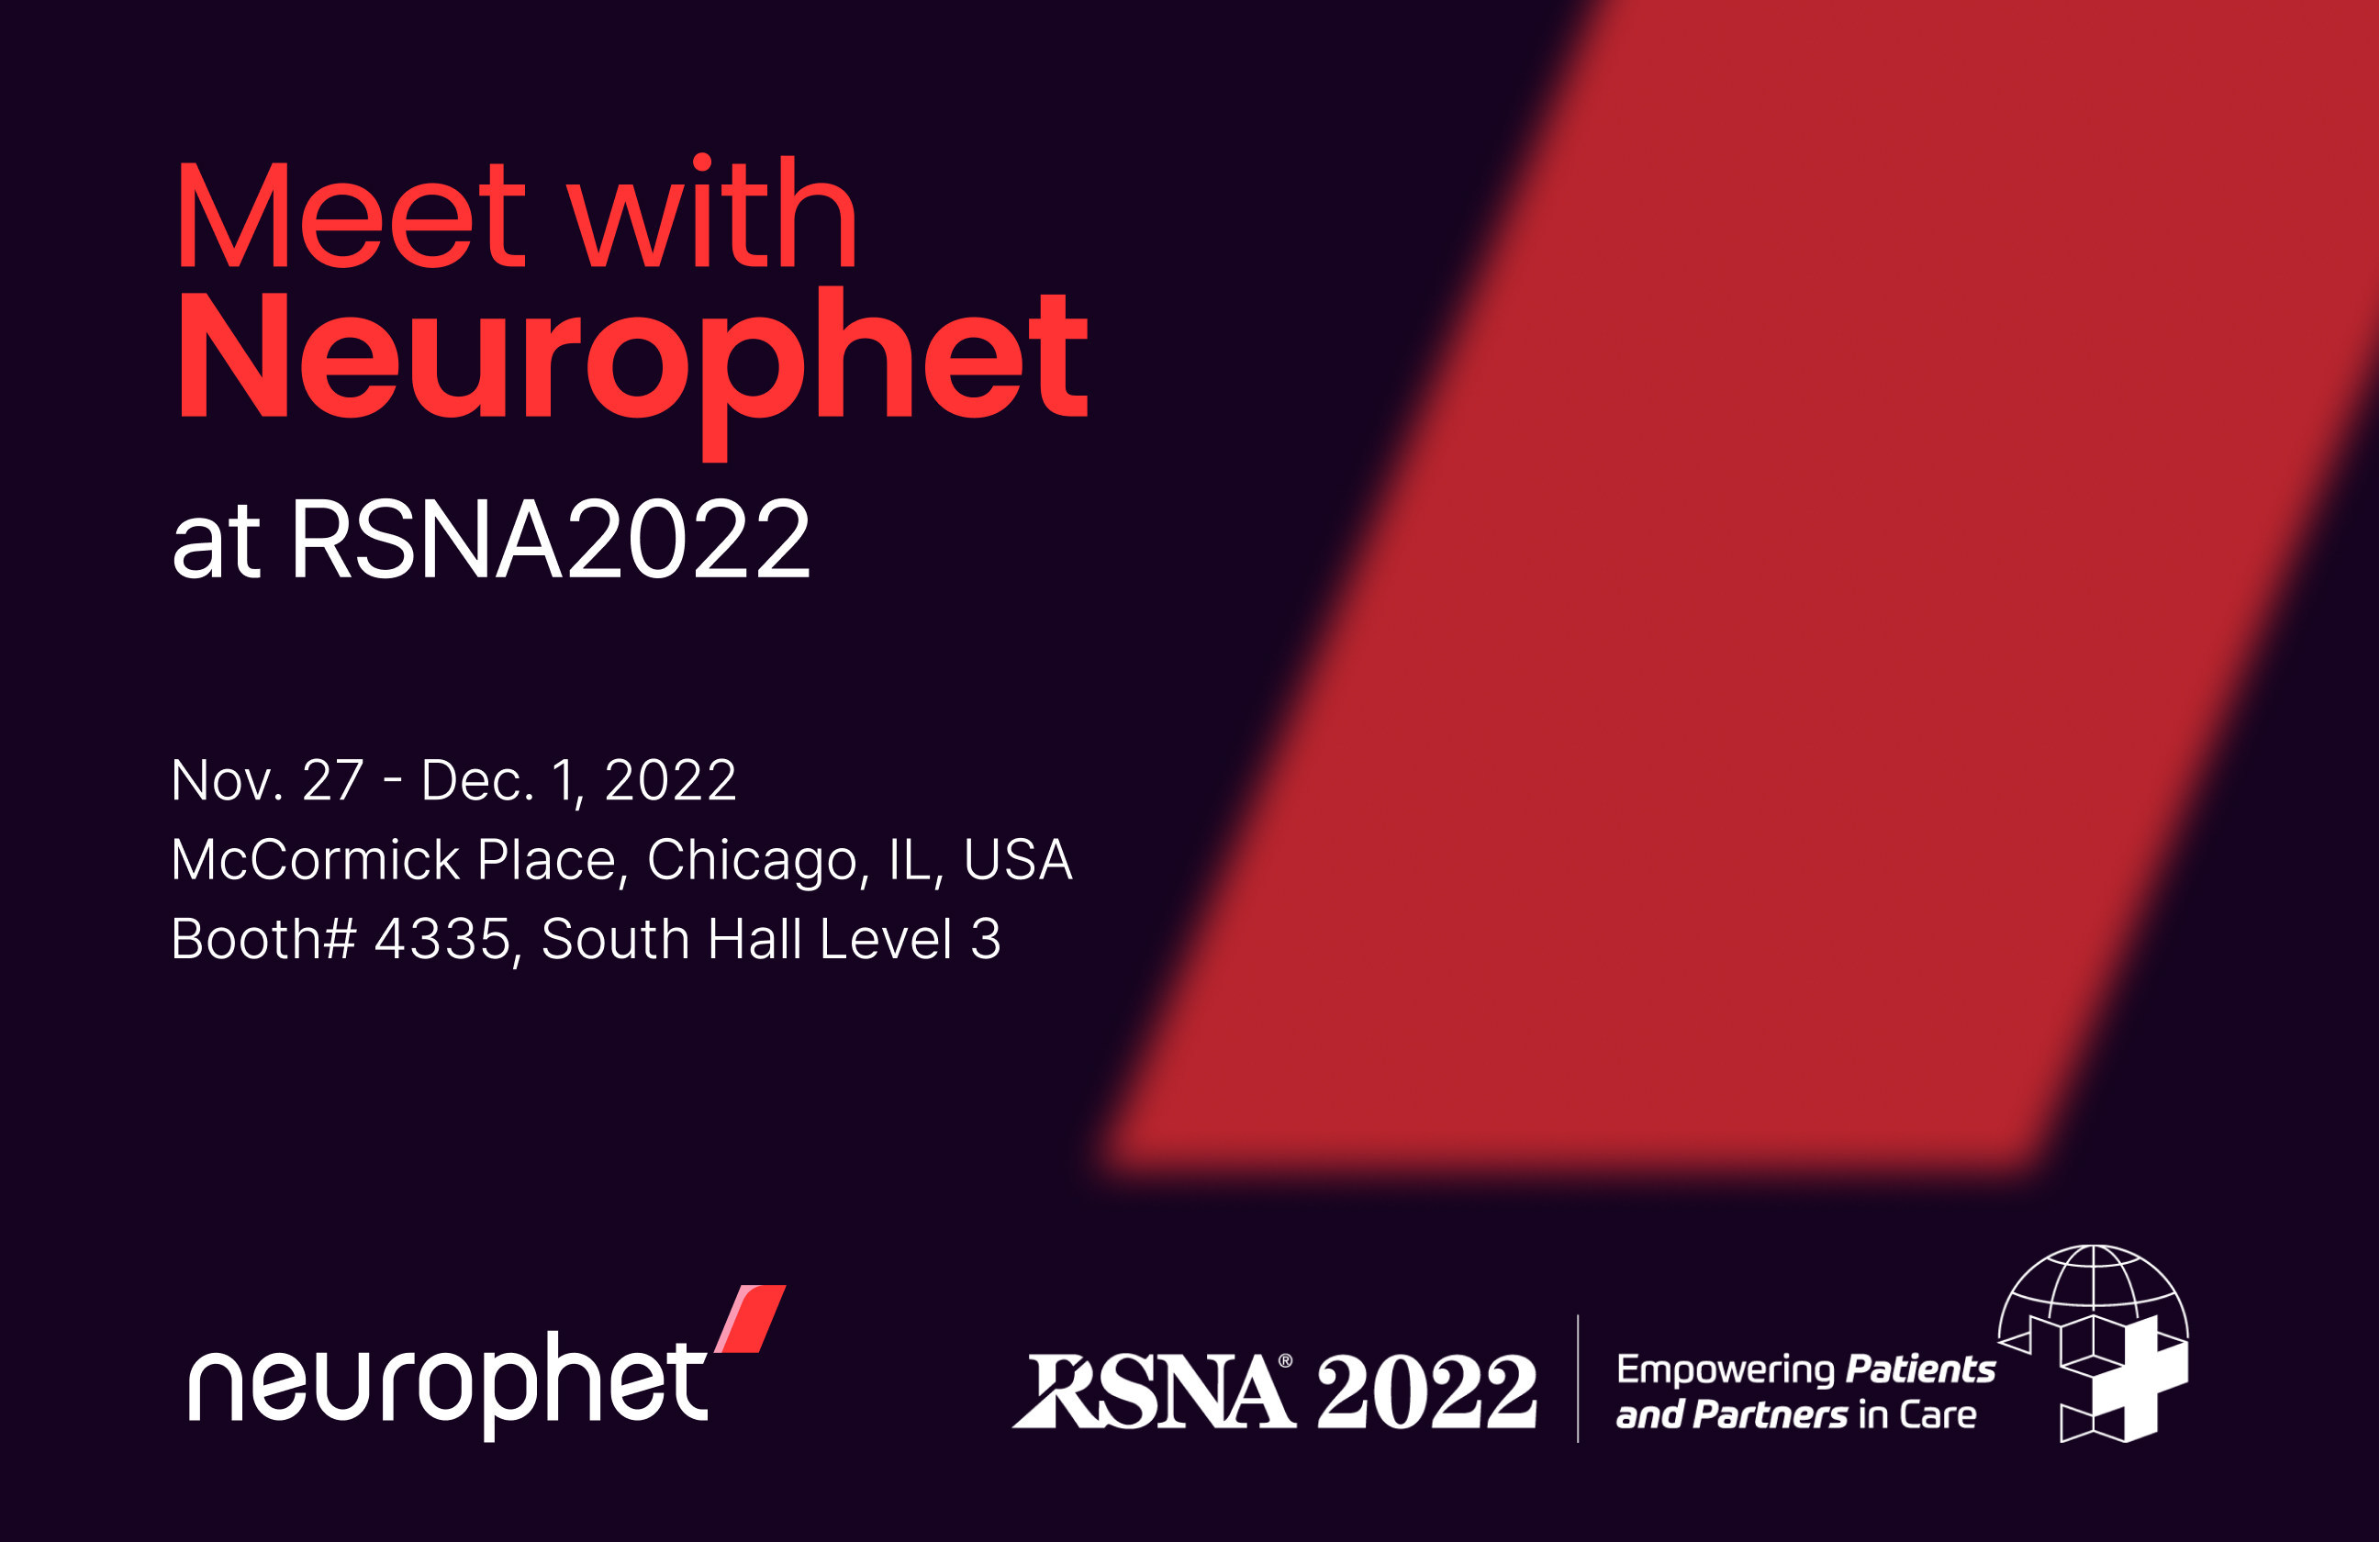 Neurophet, to participate in the Radiological Society of North America RSNA 2022